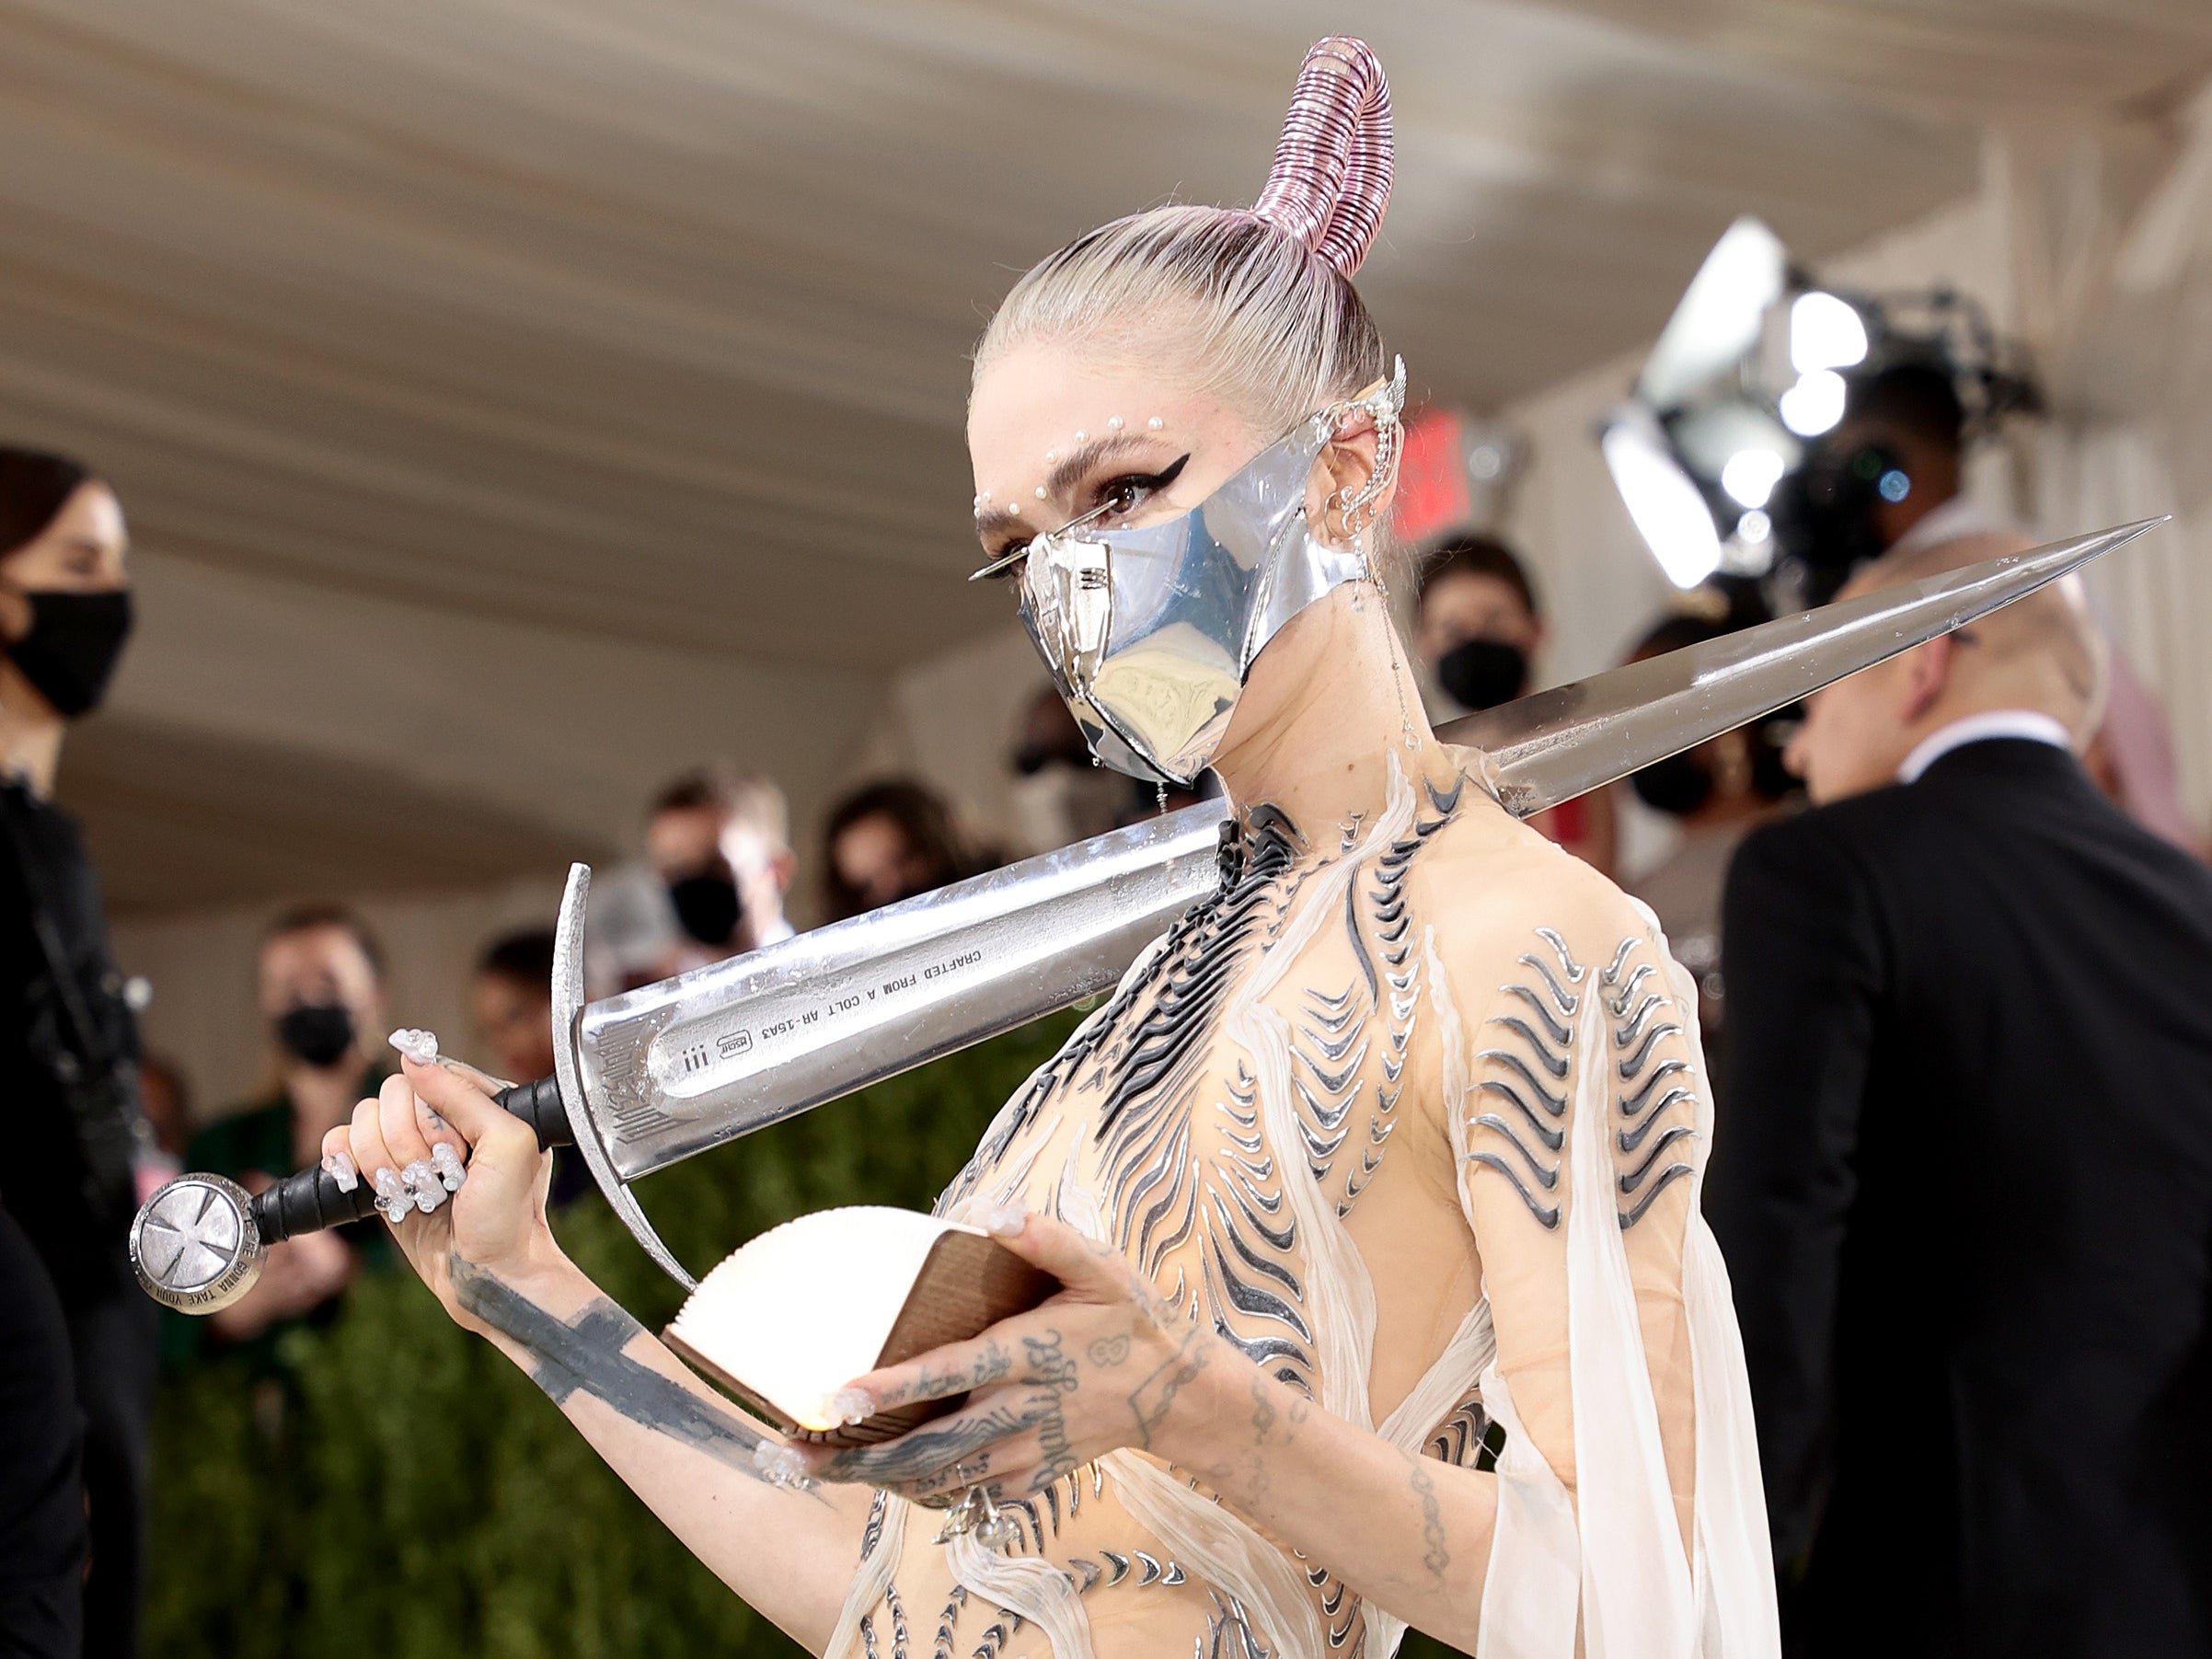 Grimes with the sword that initially barred entry to the 2021 Met Gala